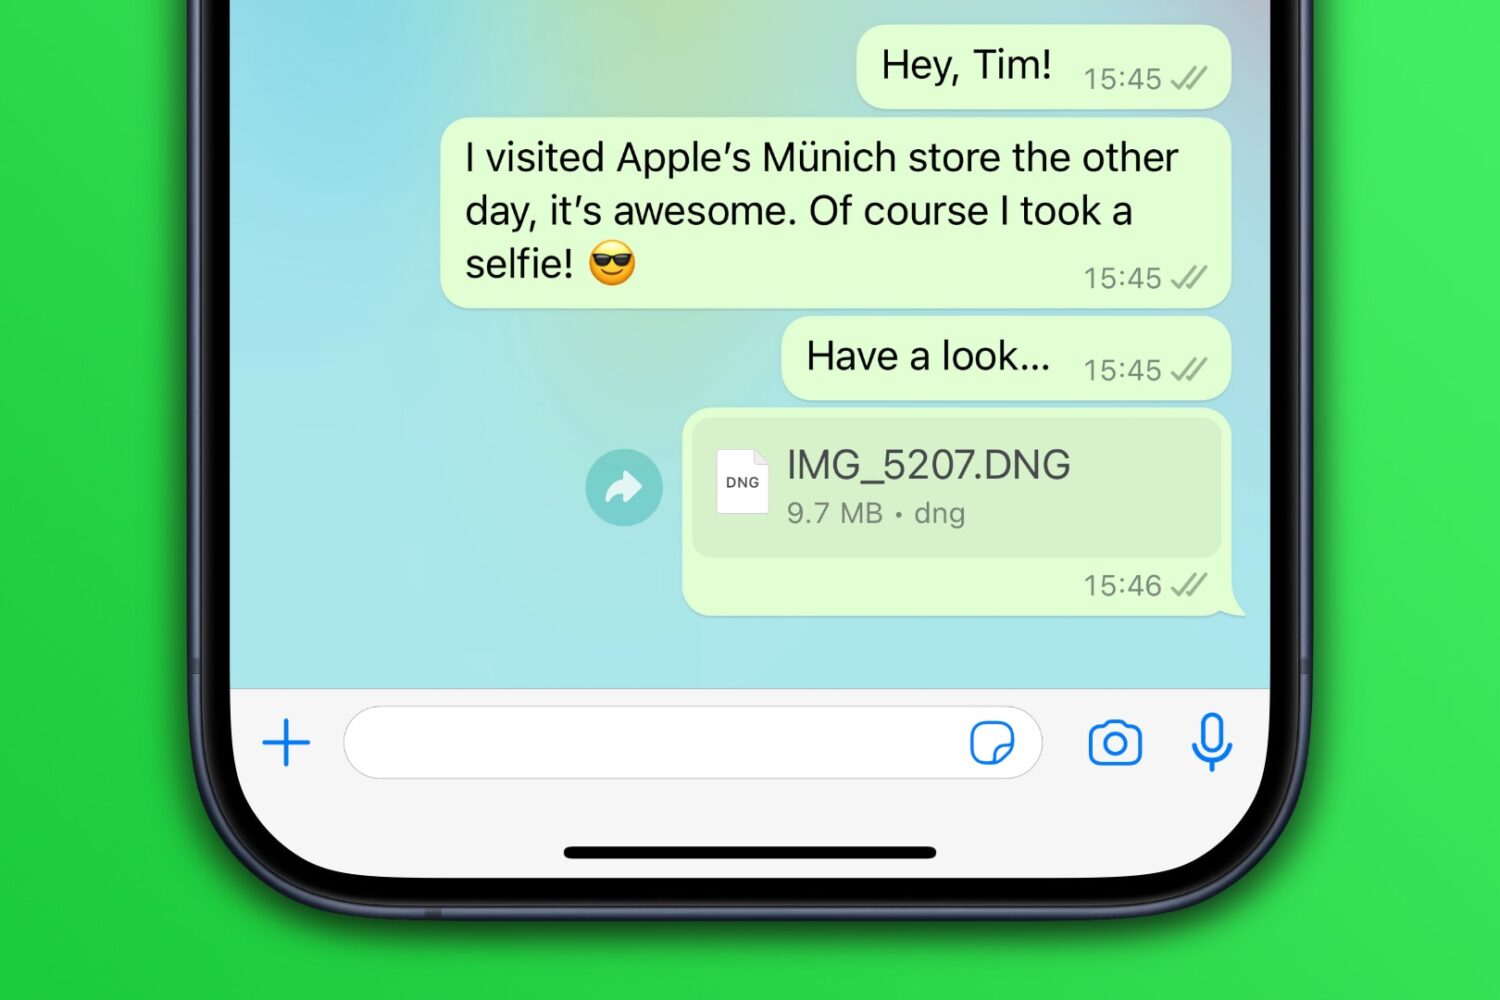 Example of a chat in the WhatsApp iPhone app with a full-resolution photo attachment